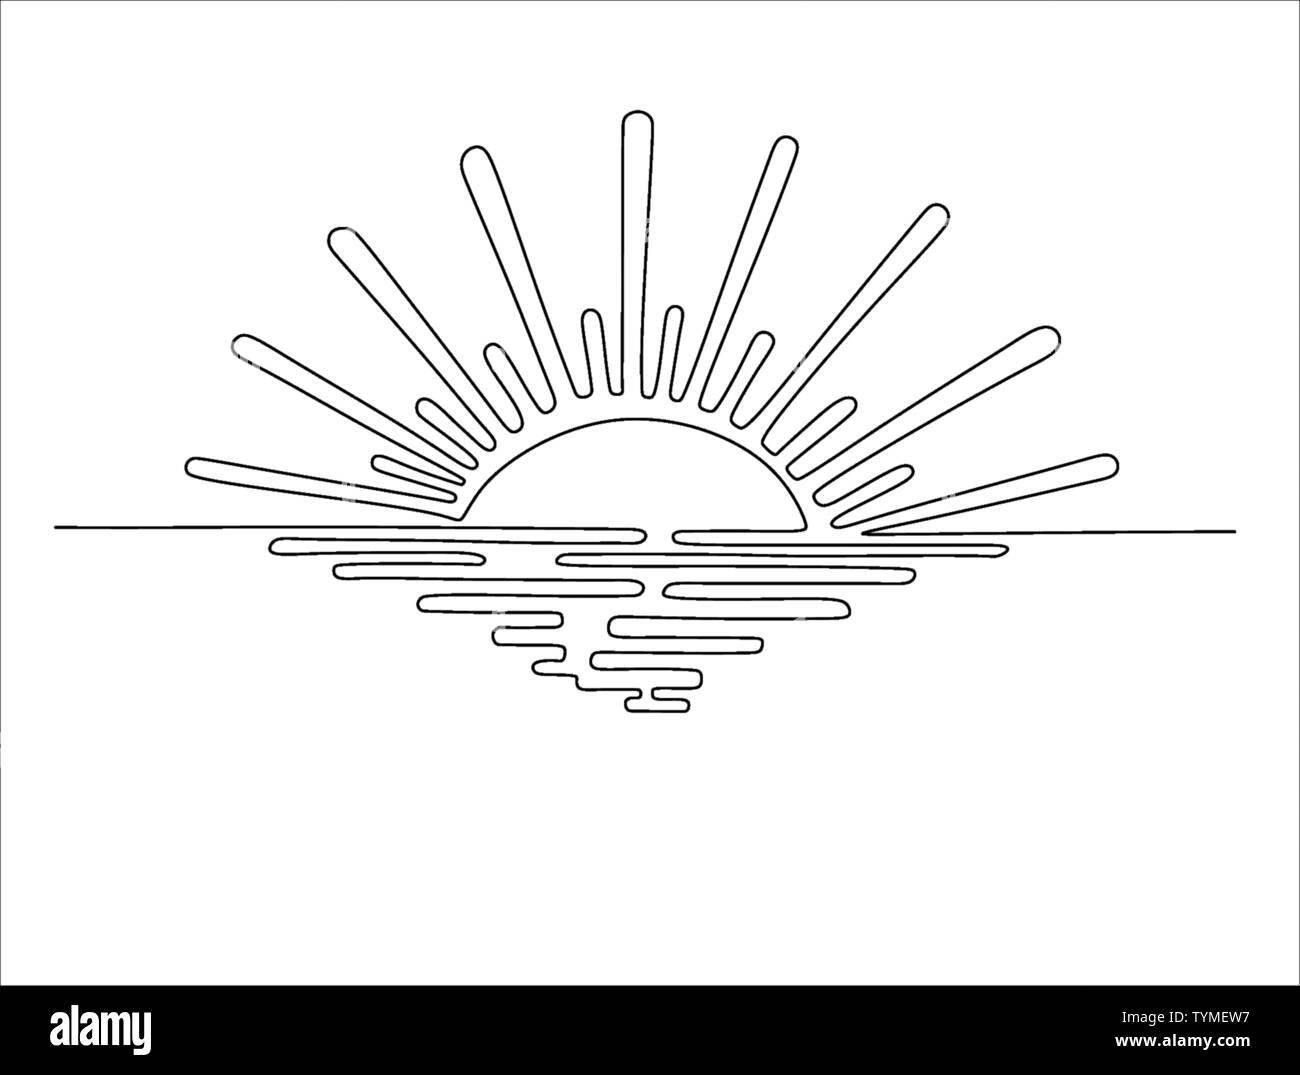 sunset line drawing